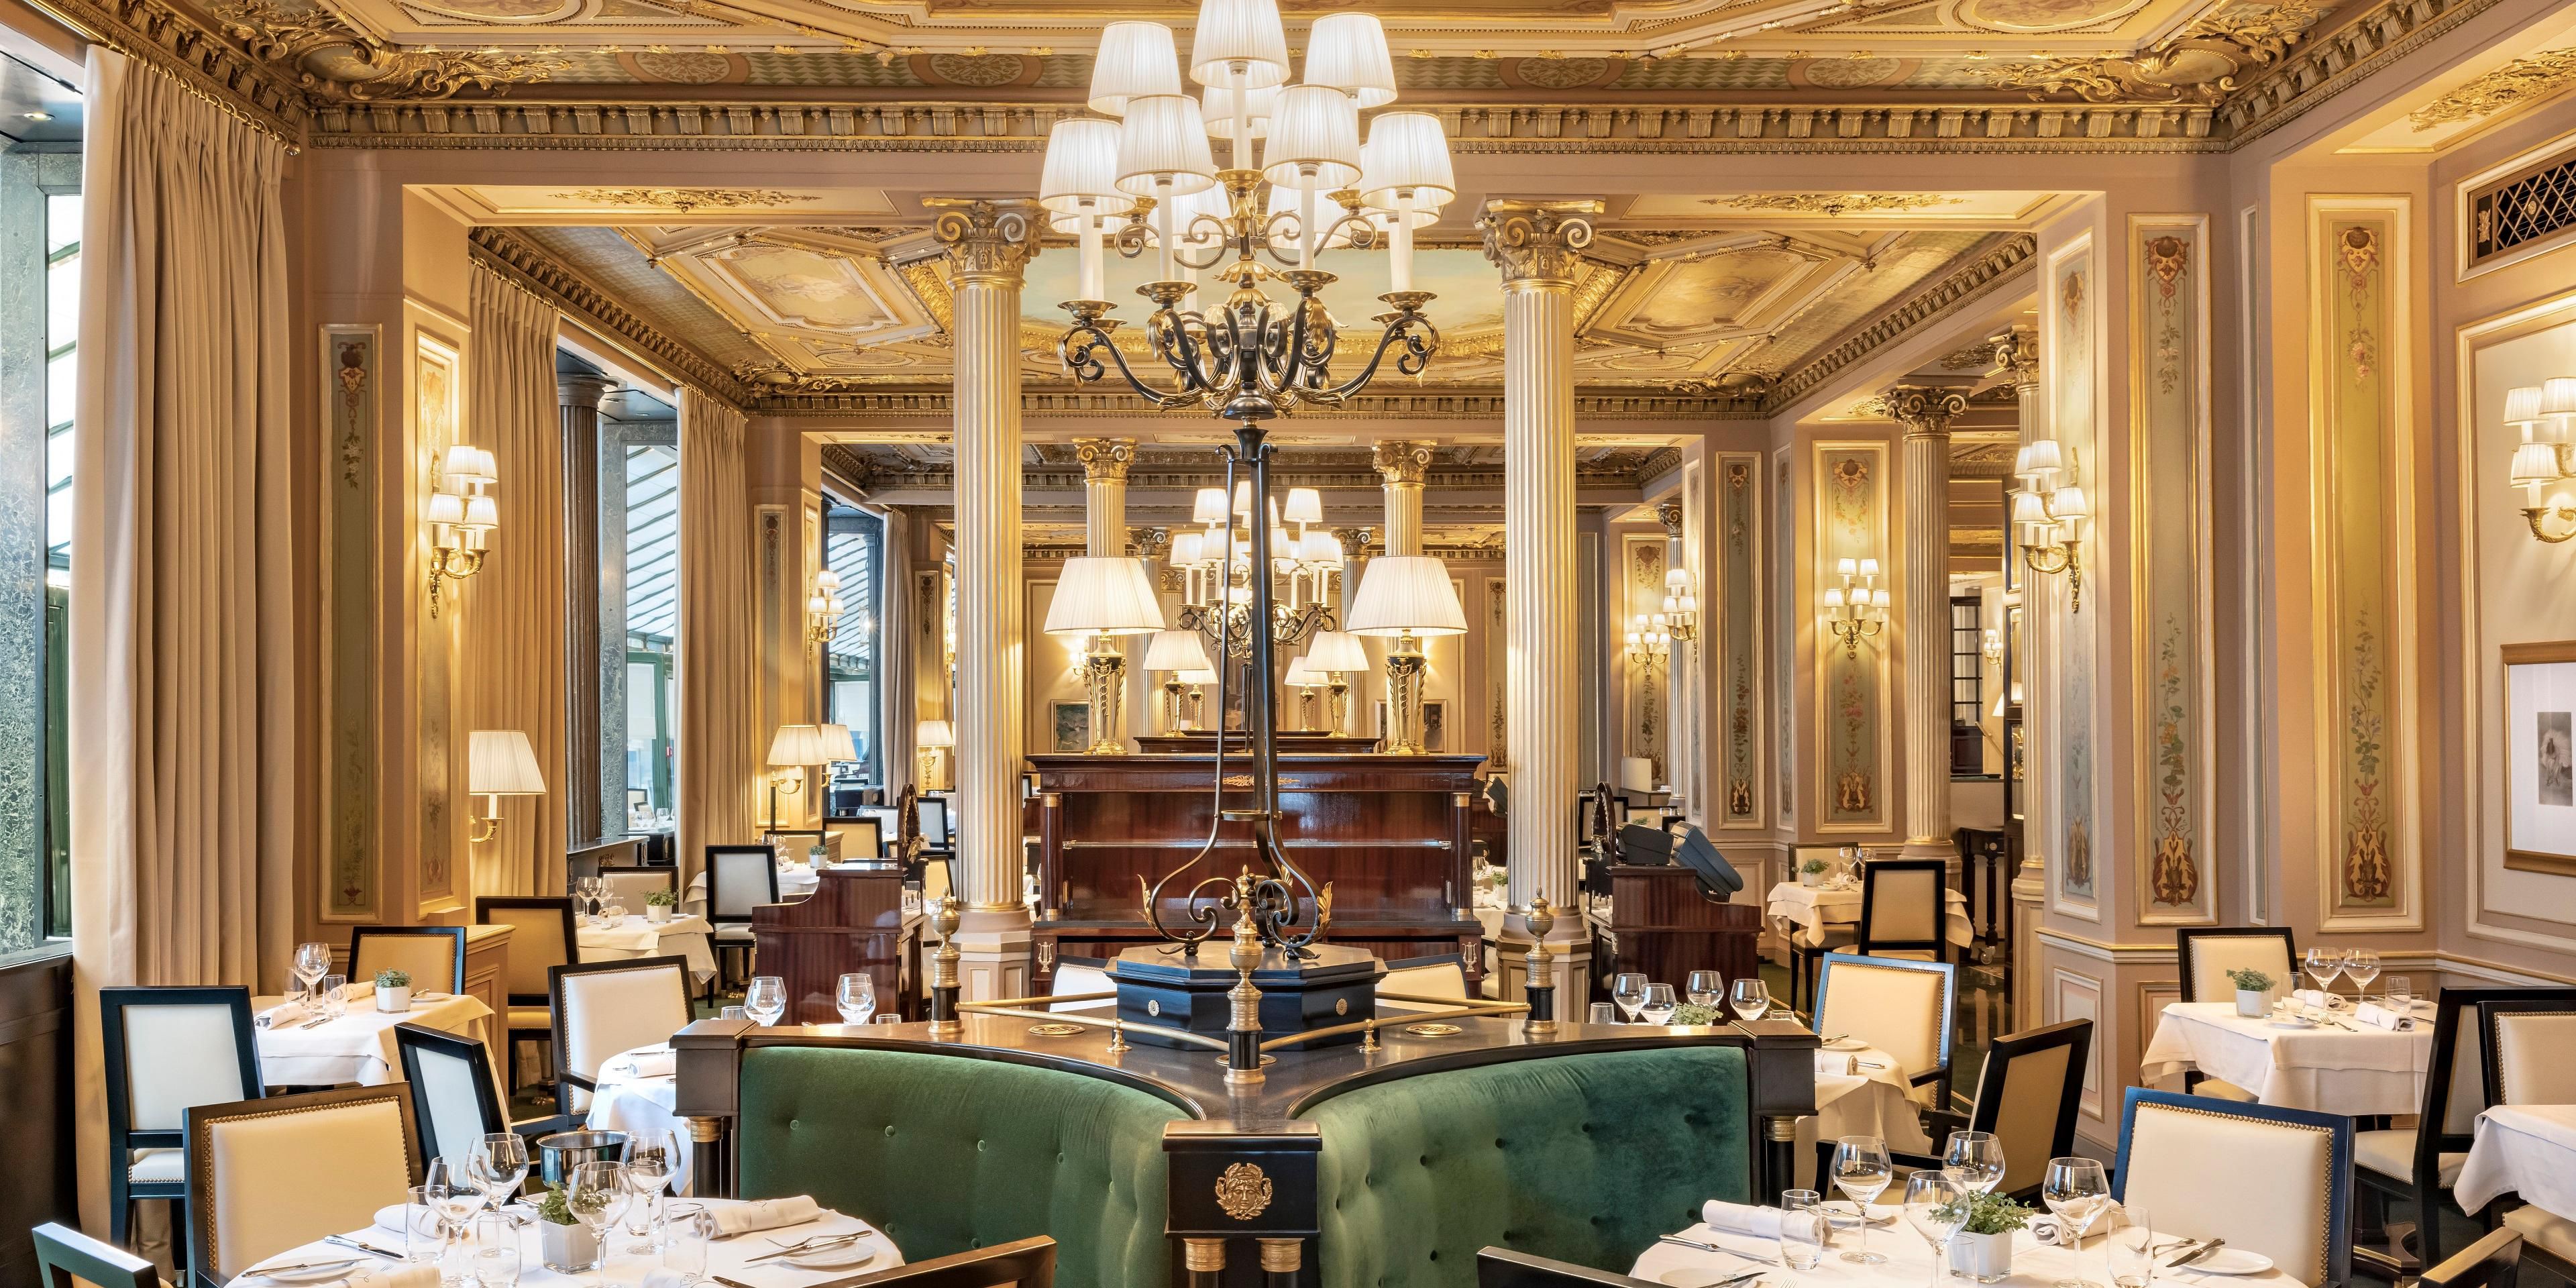 Located on the Place de l’Opéra, the Café de la Paix has embodied Parisian life since it first opened in 1862. Today, the Café de La Paix is an elegant restaurant, where Chef Laurent André offers the iconic dishes of French gastronomy for an exceptional dining experience facing the Opera Garnier.